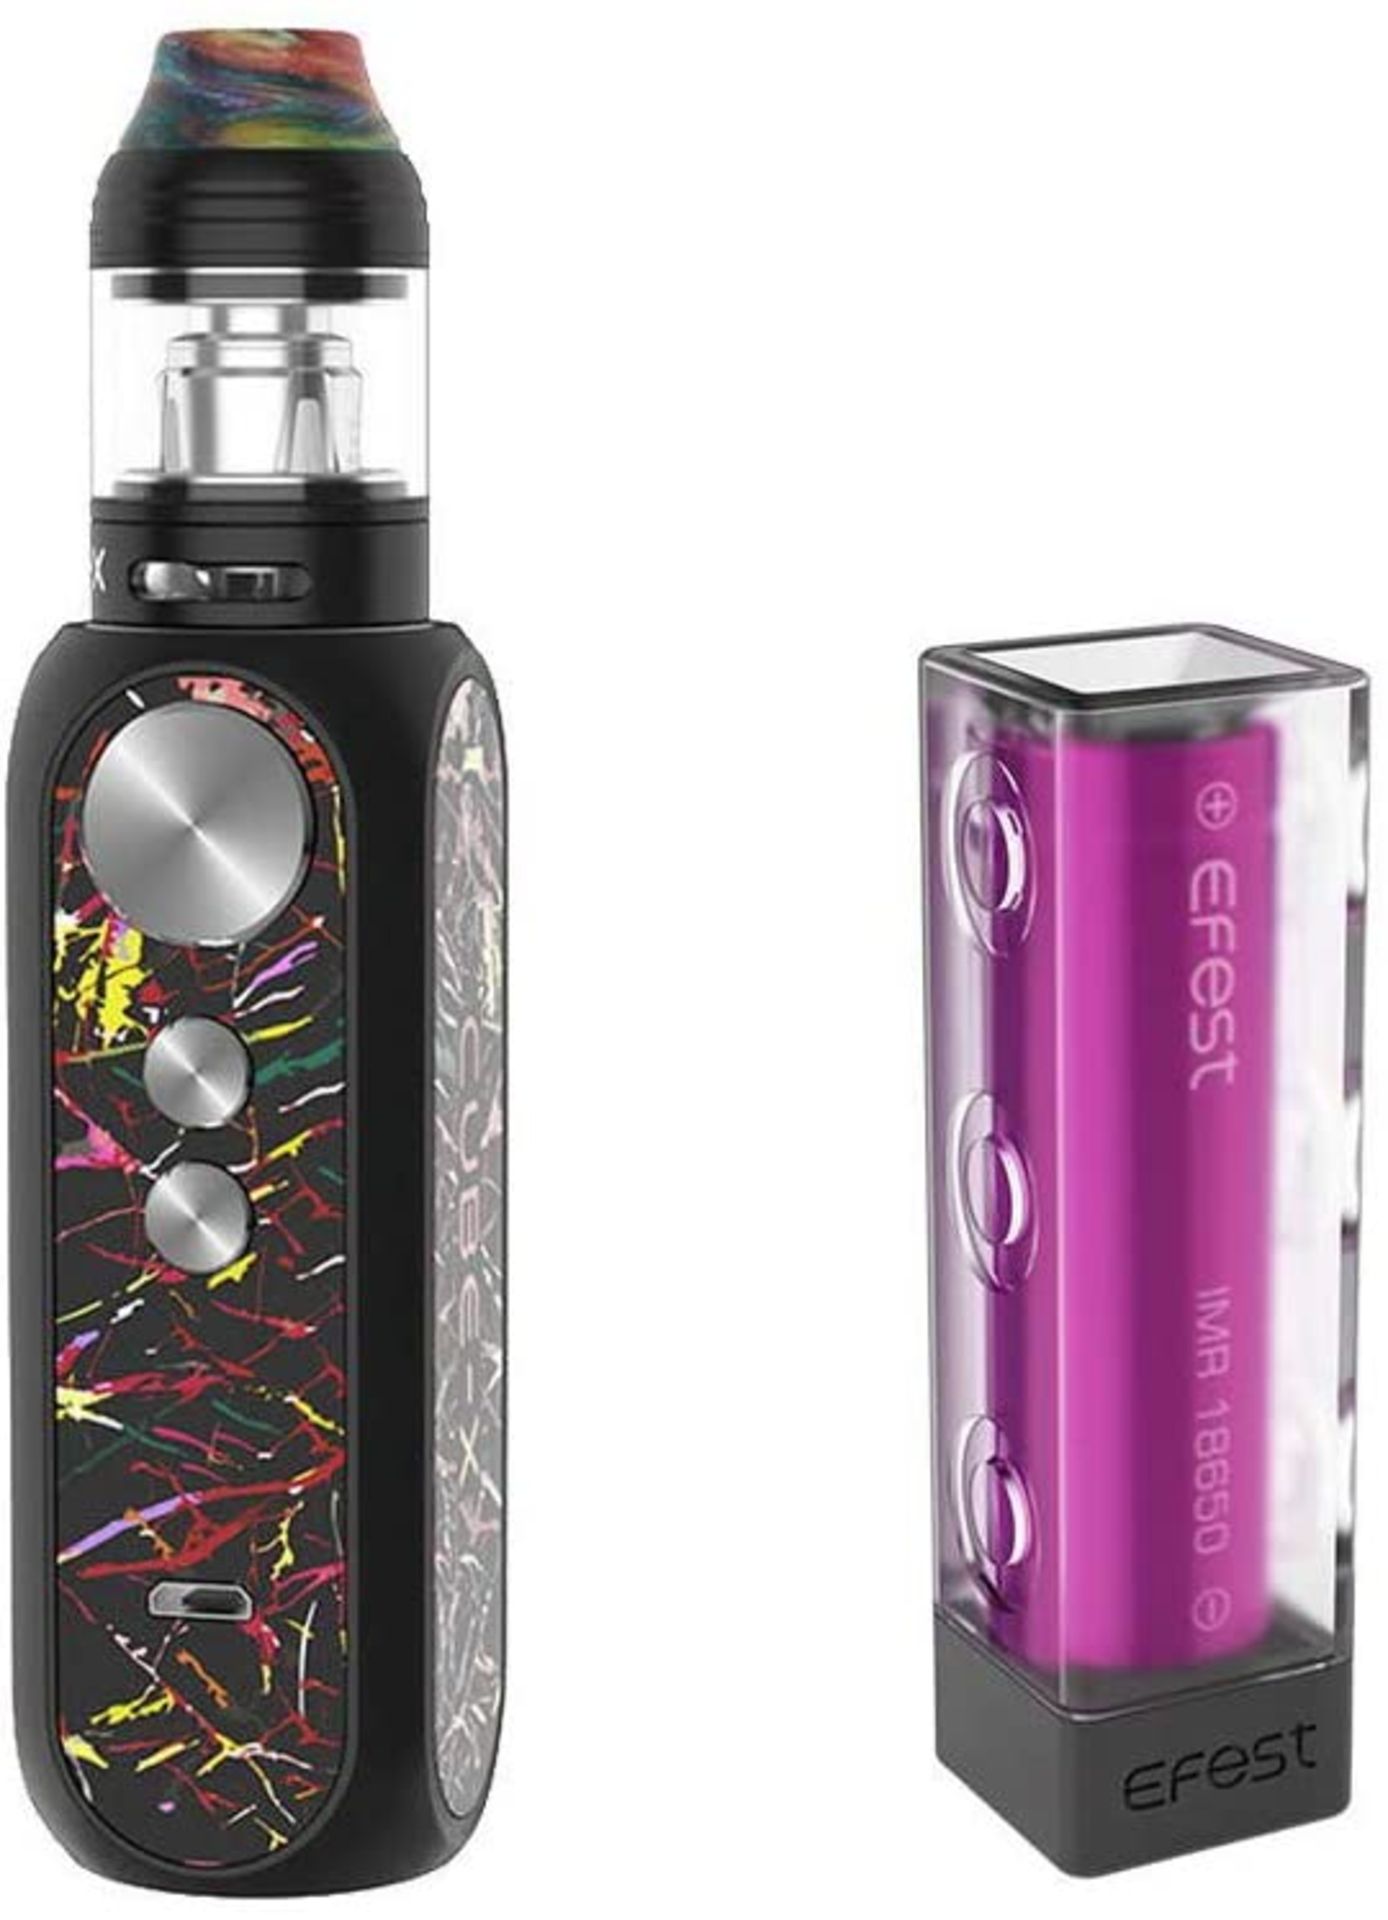 RRP £31 OBS Cube X 80W VW Kit with Cube X Mesh Tank (Rainbow Candy) with Efest 1X 3000 mah Battery N